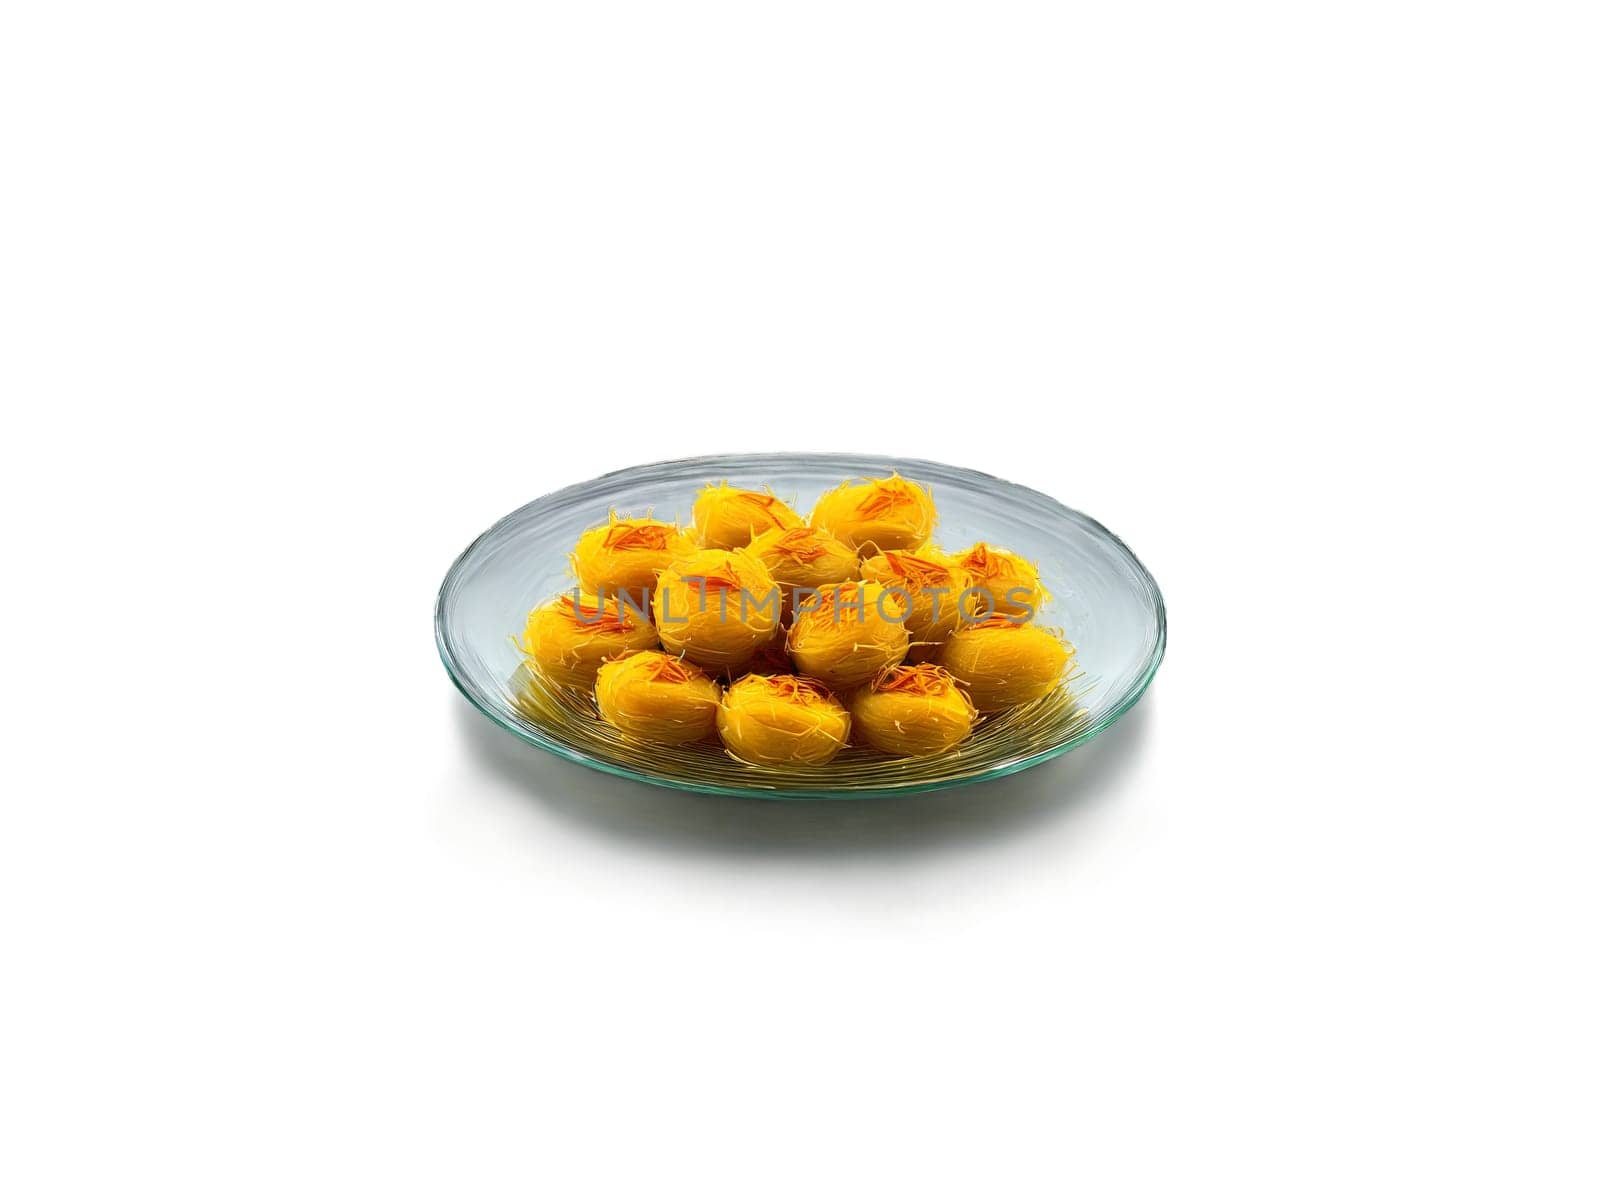 Peda with Saffron Small pedas with a hint of saffron arranged on a glass plate. Food isolated on transparent background.